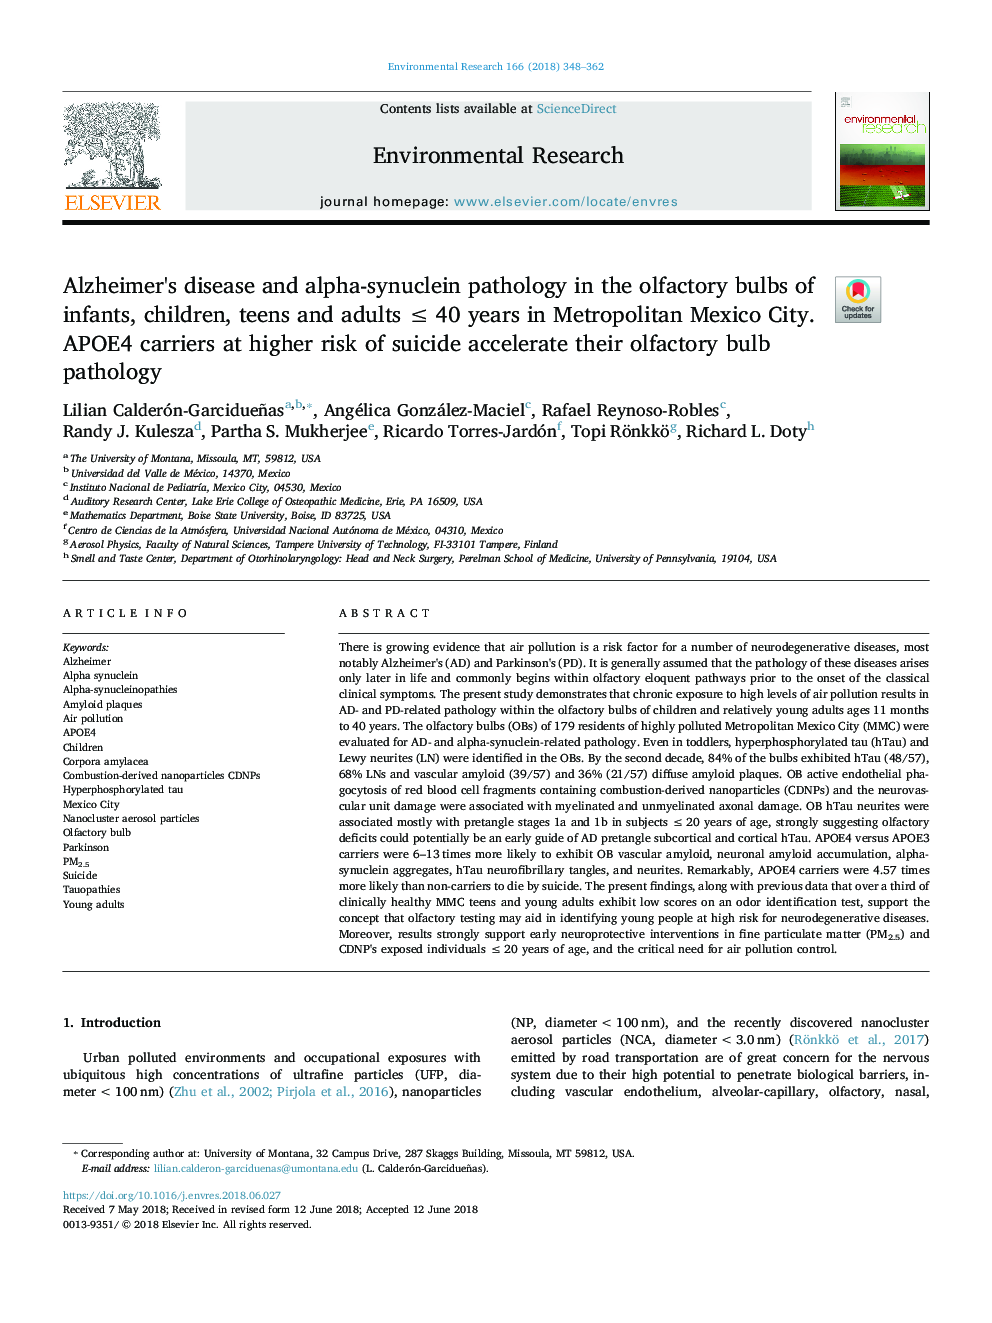 Alzheimer's disease and alpha-synuclein pathology in the olfactory bulbs of infants, children, teens and adults â¤â¯40 years in Metropolitan Mexico City. APOE4 carriers at higher risk of suicide accelerate their olfactory bulb pathology